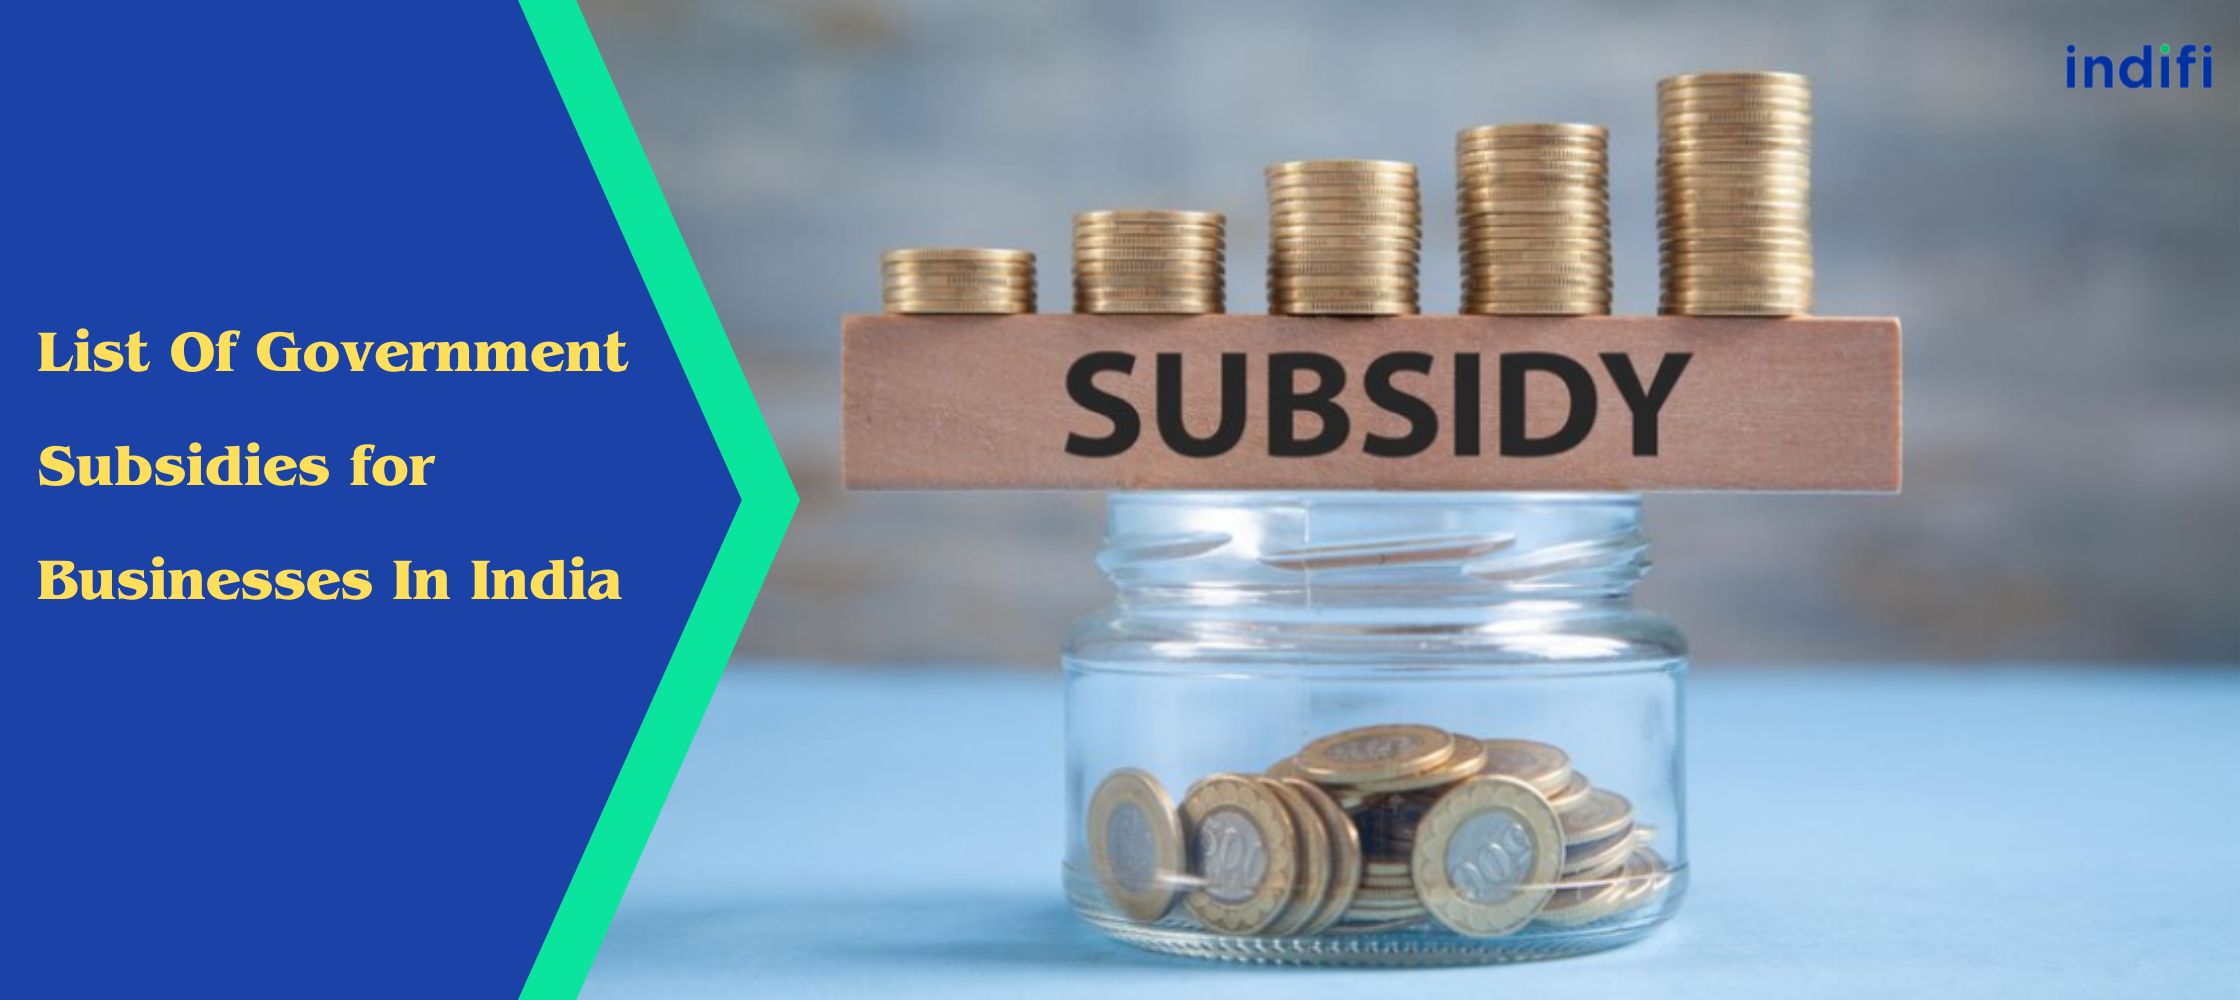 Top 10 Government Subsidies for Businesses in India